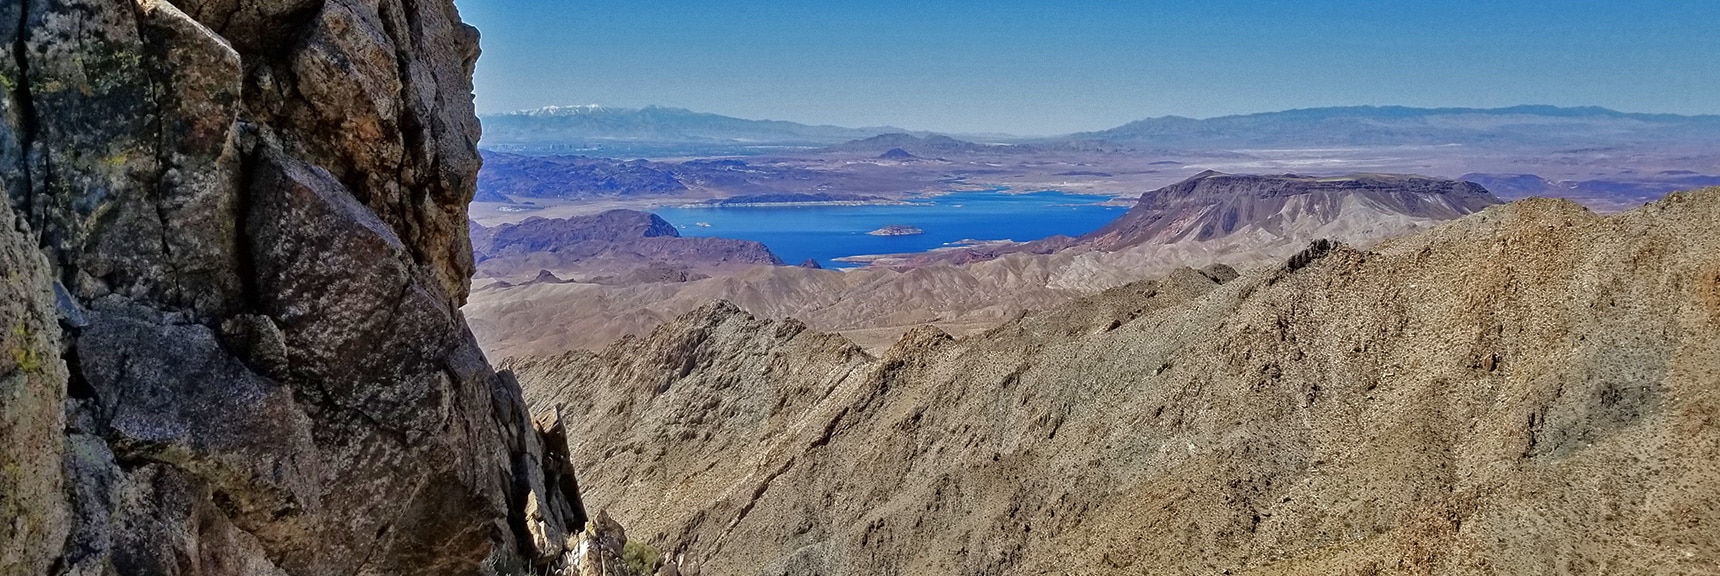 Lake Mead from Just Below Mt. Wilson Summit Approach Ridge | Horse Thief Canyon Loop | Mt. Wilson | Black Mountains | Lake Mead National Recreation Area, Arizona